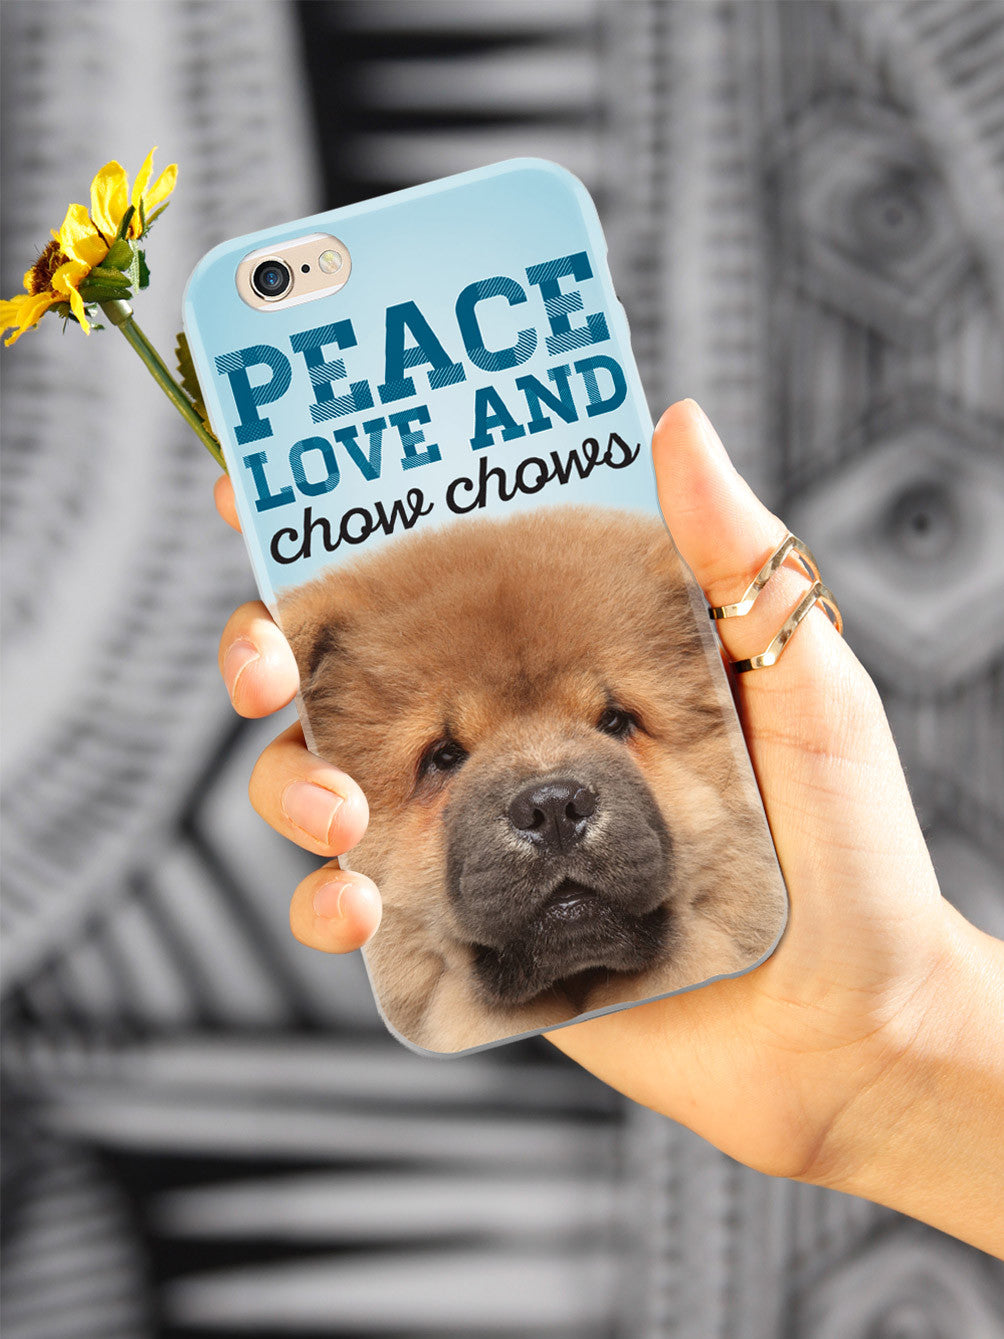 Peace Love and Chow Chows - Real Life Case